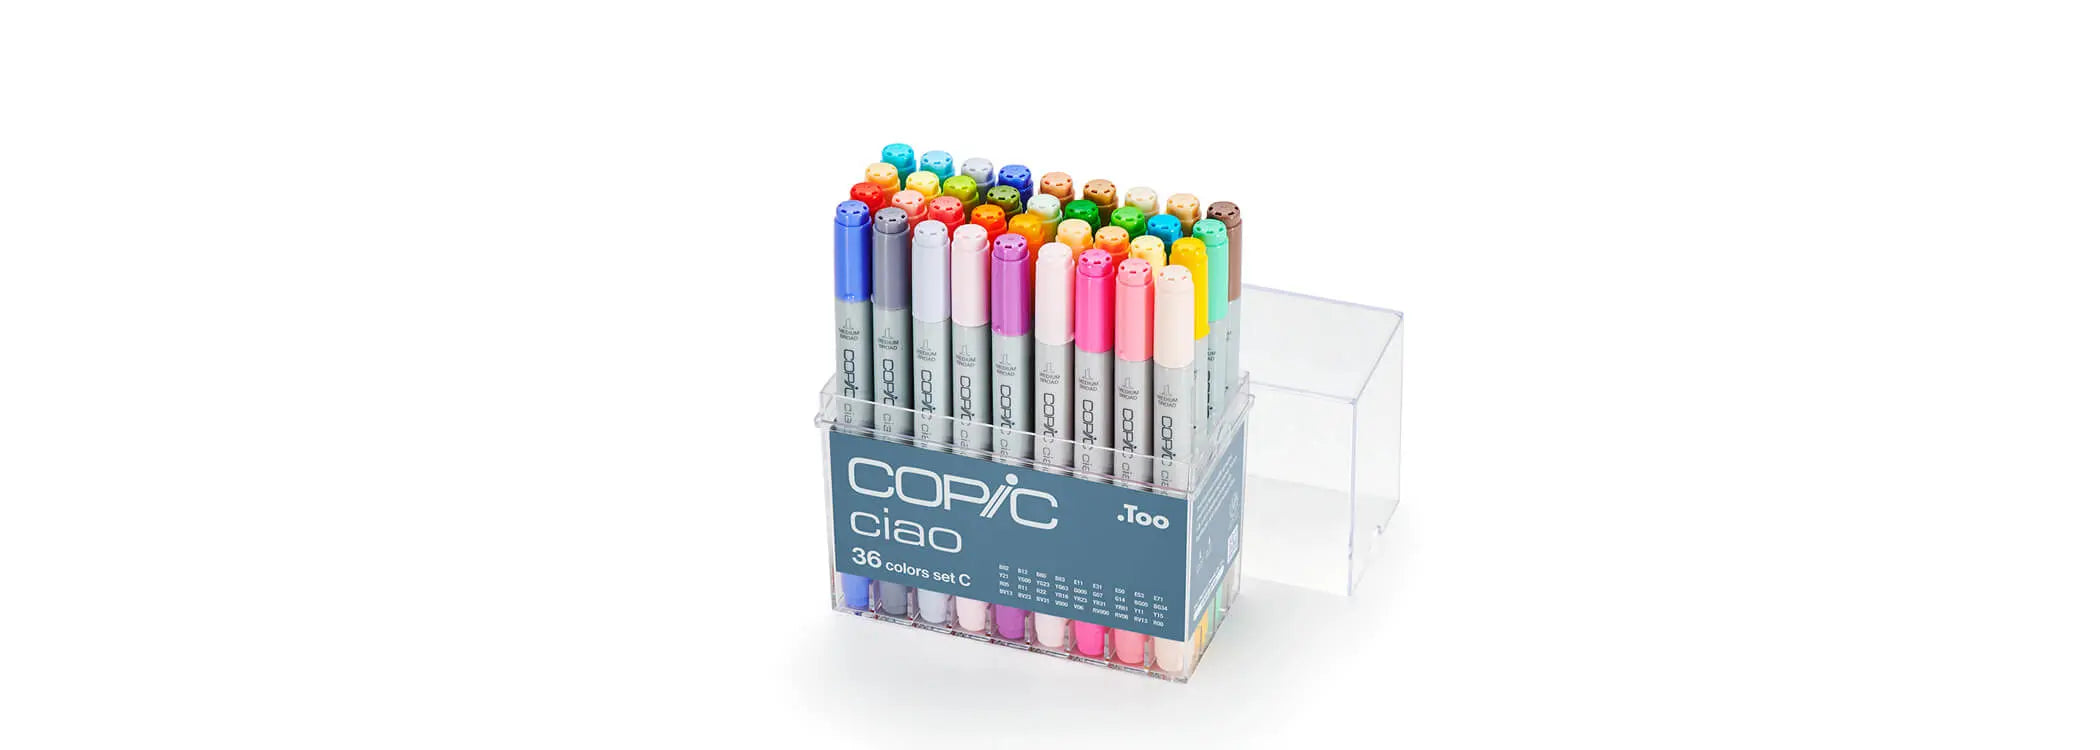 Copic Ciao Markers Set of 36 Shades Copic